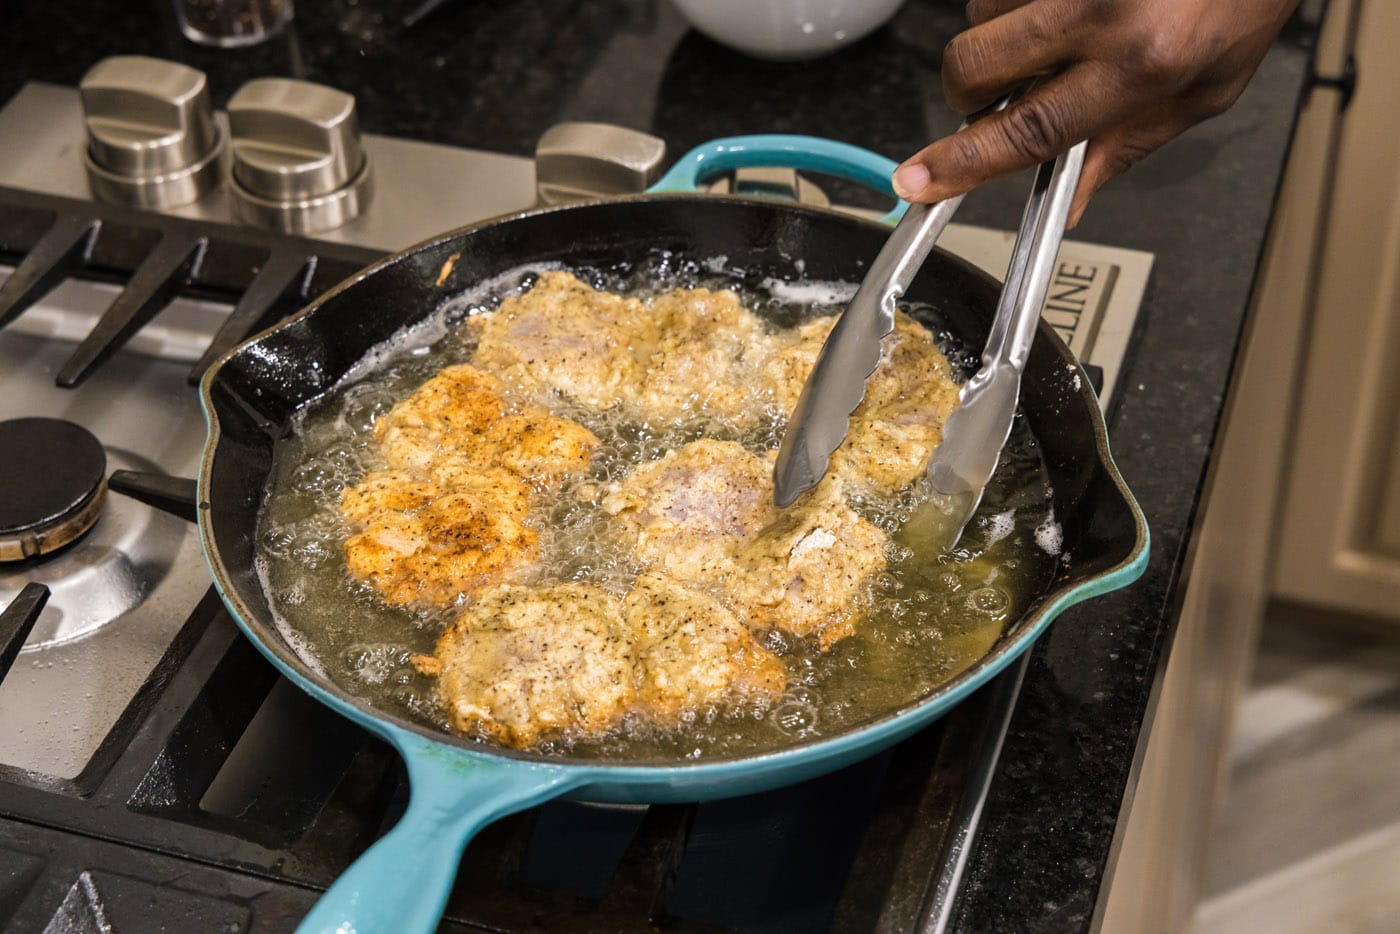 tongs flipping fried chicken in a skillet